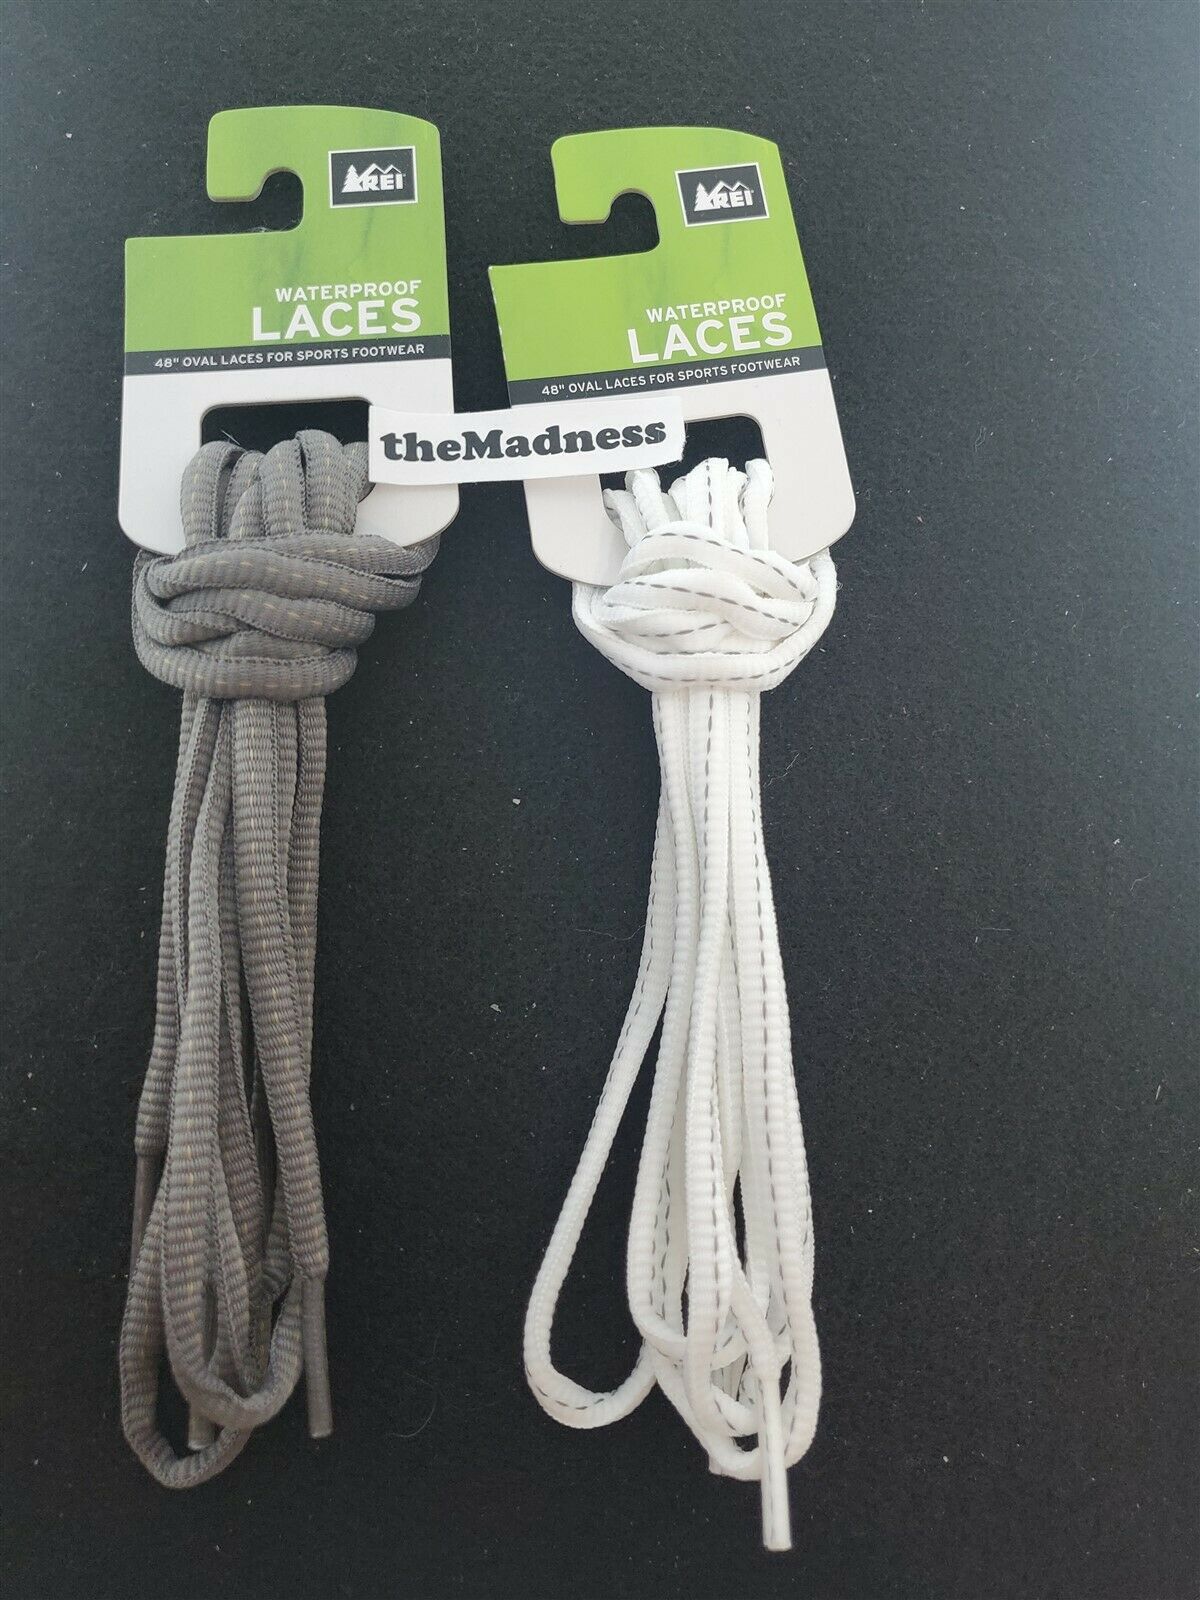 New TWO Pair White Grey REI Waterproof Shoe Boot Laces Oval 48" for Hiking